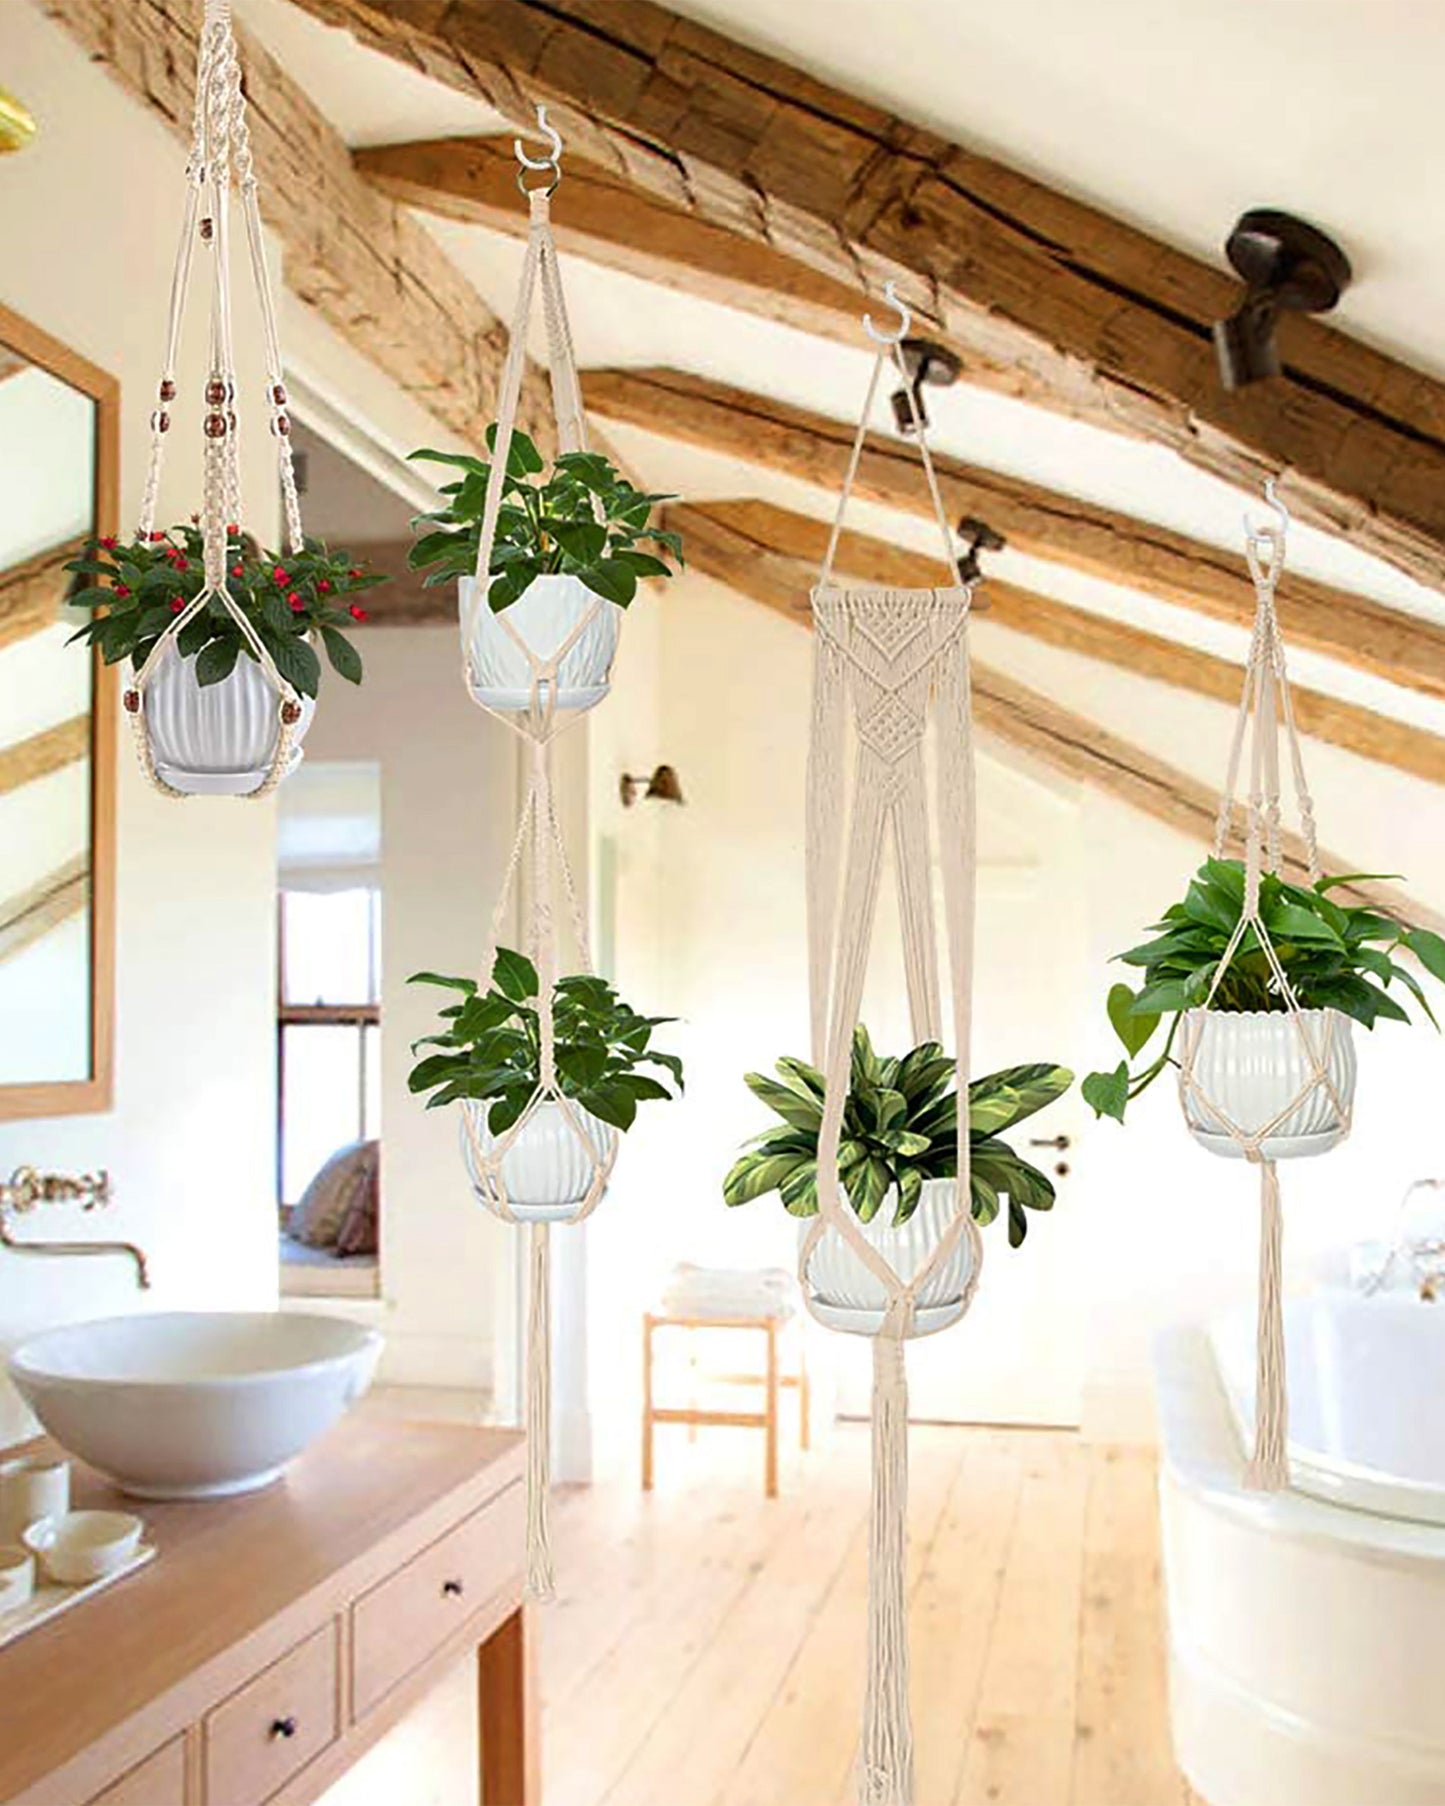 5-Pack Macrame Plant Hangers with Hooks, Different Layers, Handmade Cotton Rope Hanging Planters Set Flower Pots Holder Stand, for Indoor Outdoor Boho Home Decor, set of 5